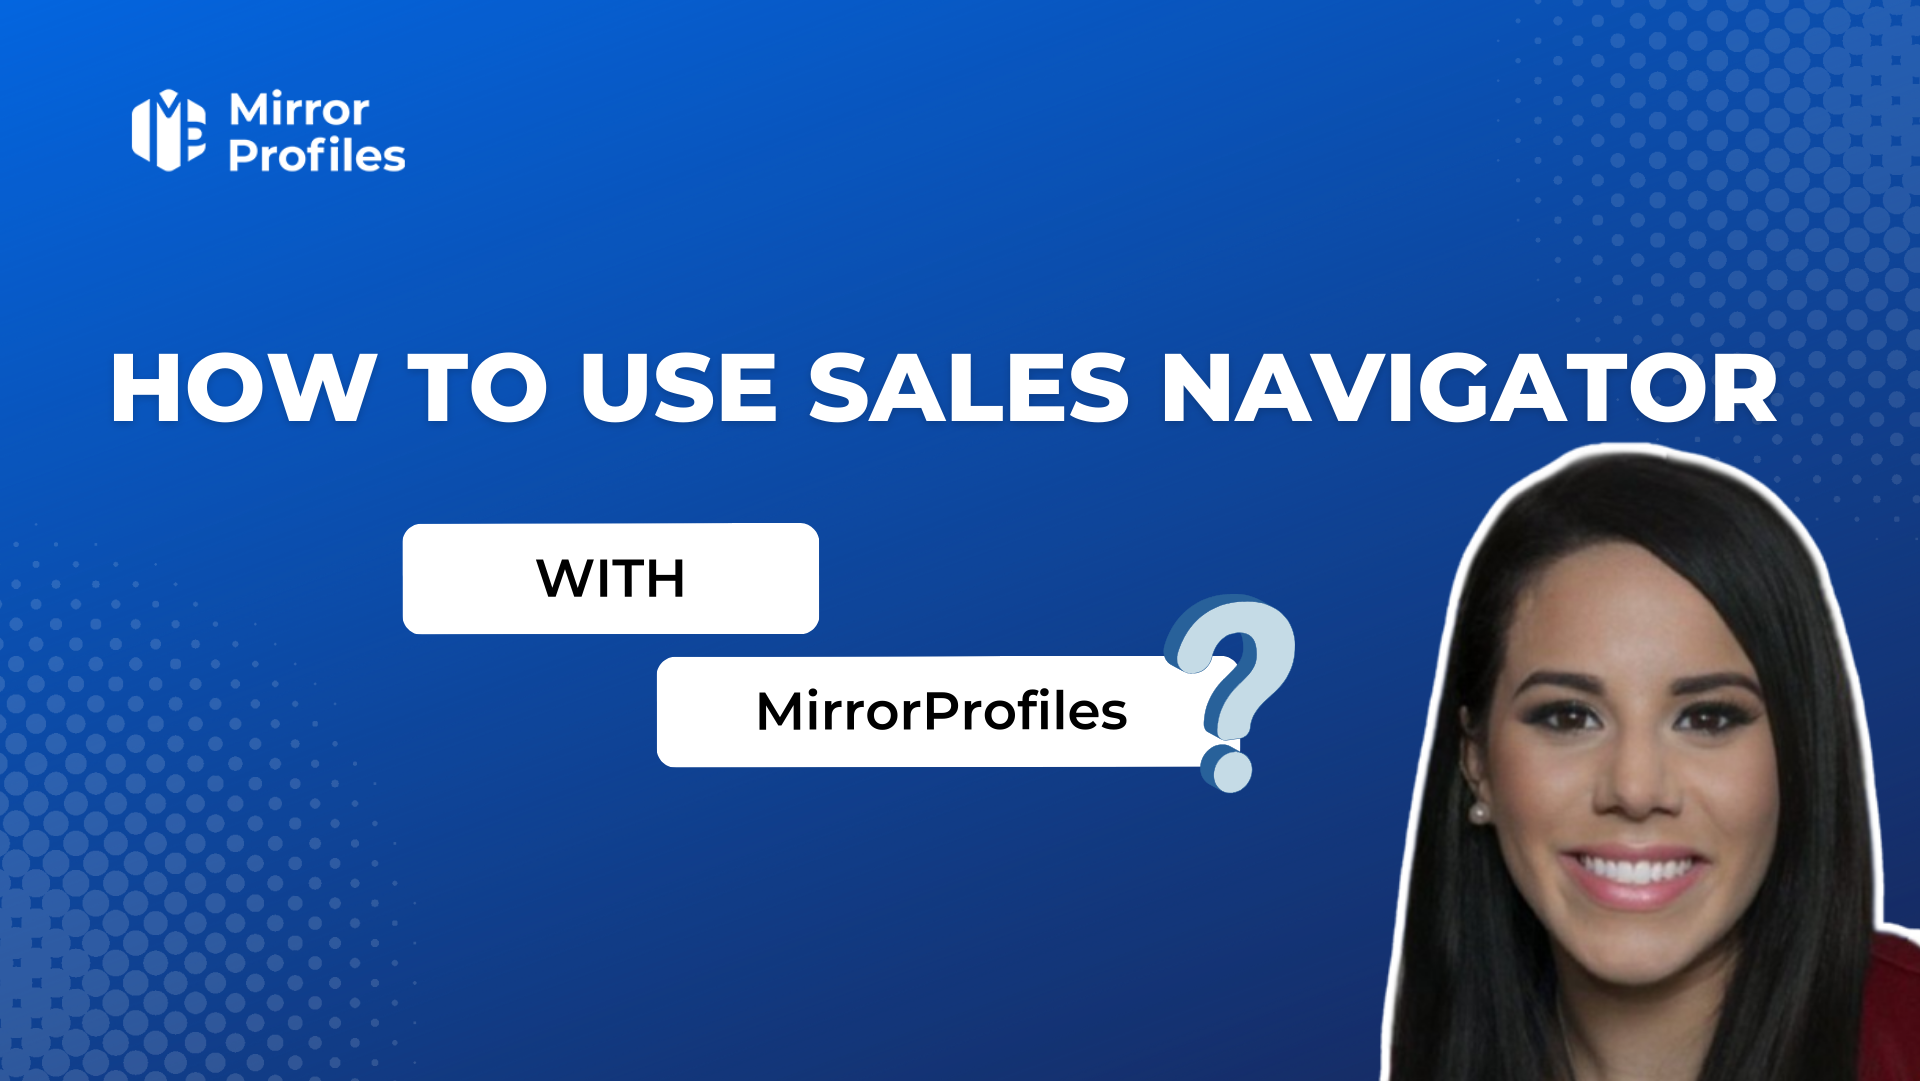 How to use sales navigator with mirroprofile